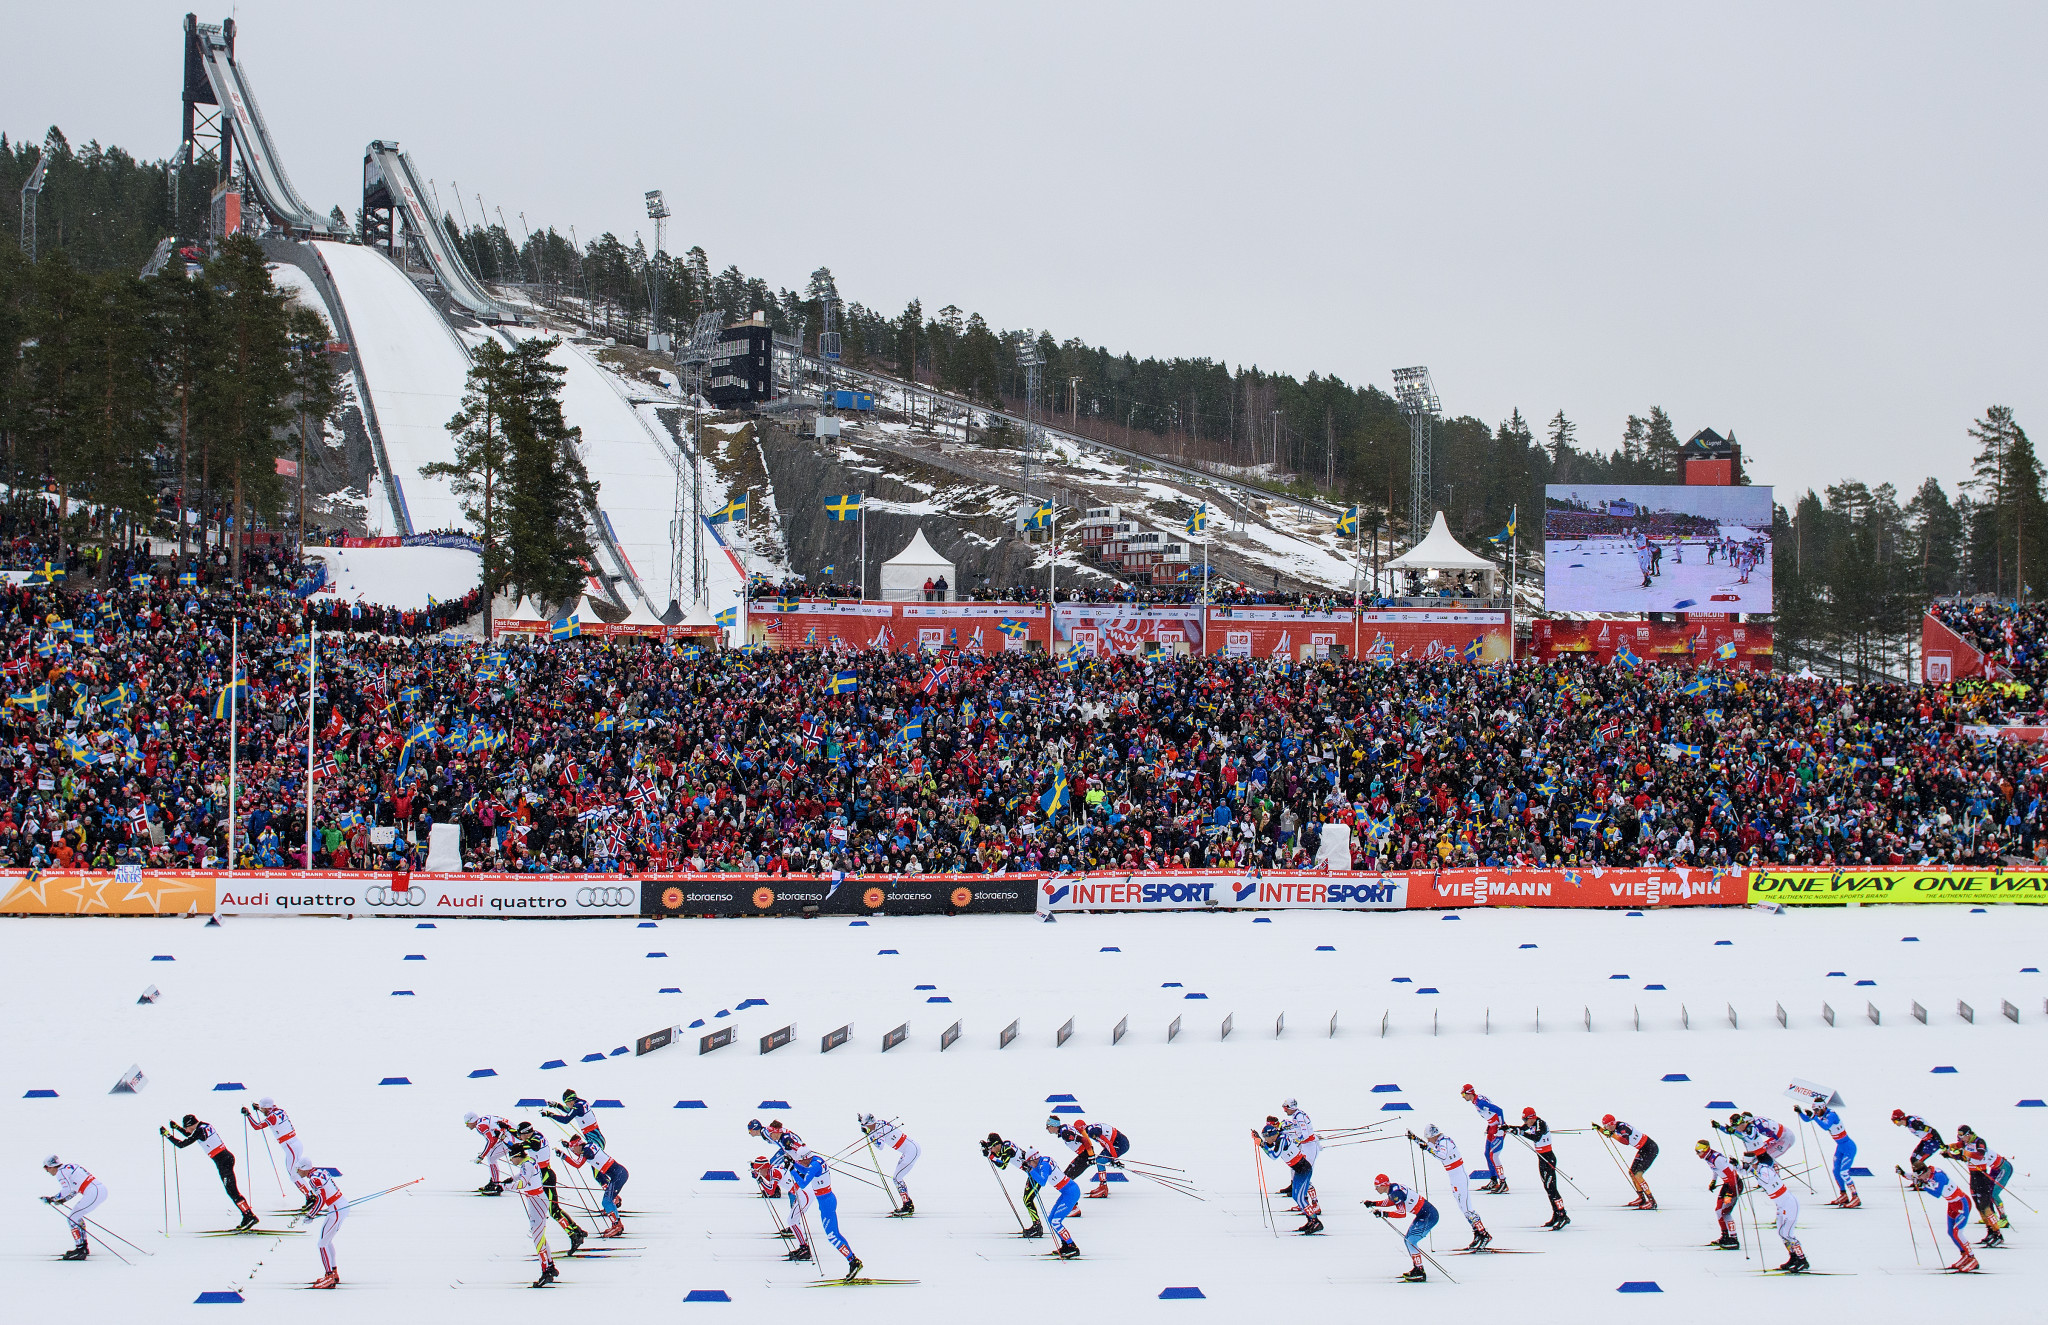 Falun has committed to providing the Lugnet stadium as part of Sweden's bid for the 2030 Winter Olympics and Paralympics ©Getty Images